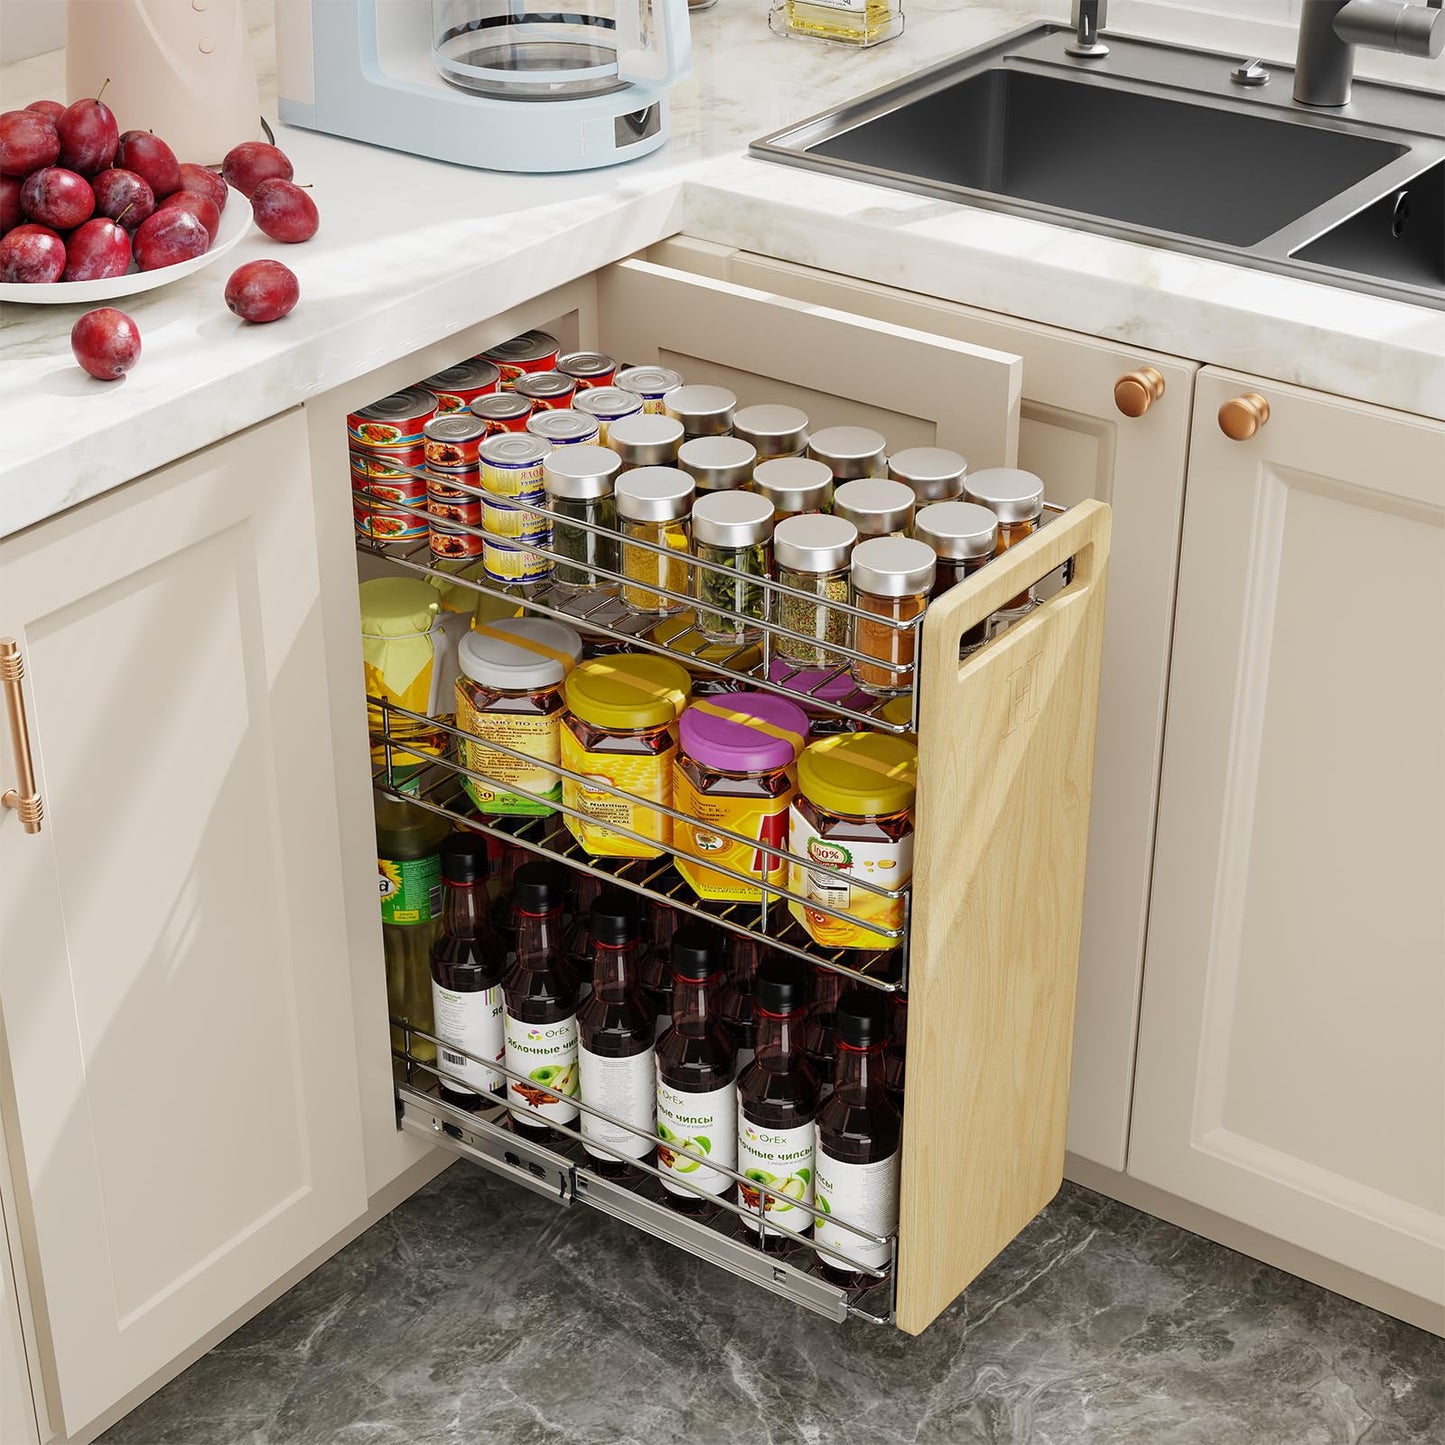 3-Tier Pull-Out Shelf With Wooden Handle Planks